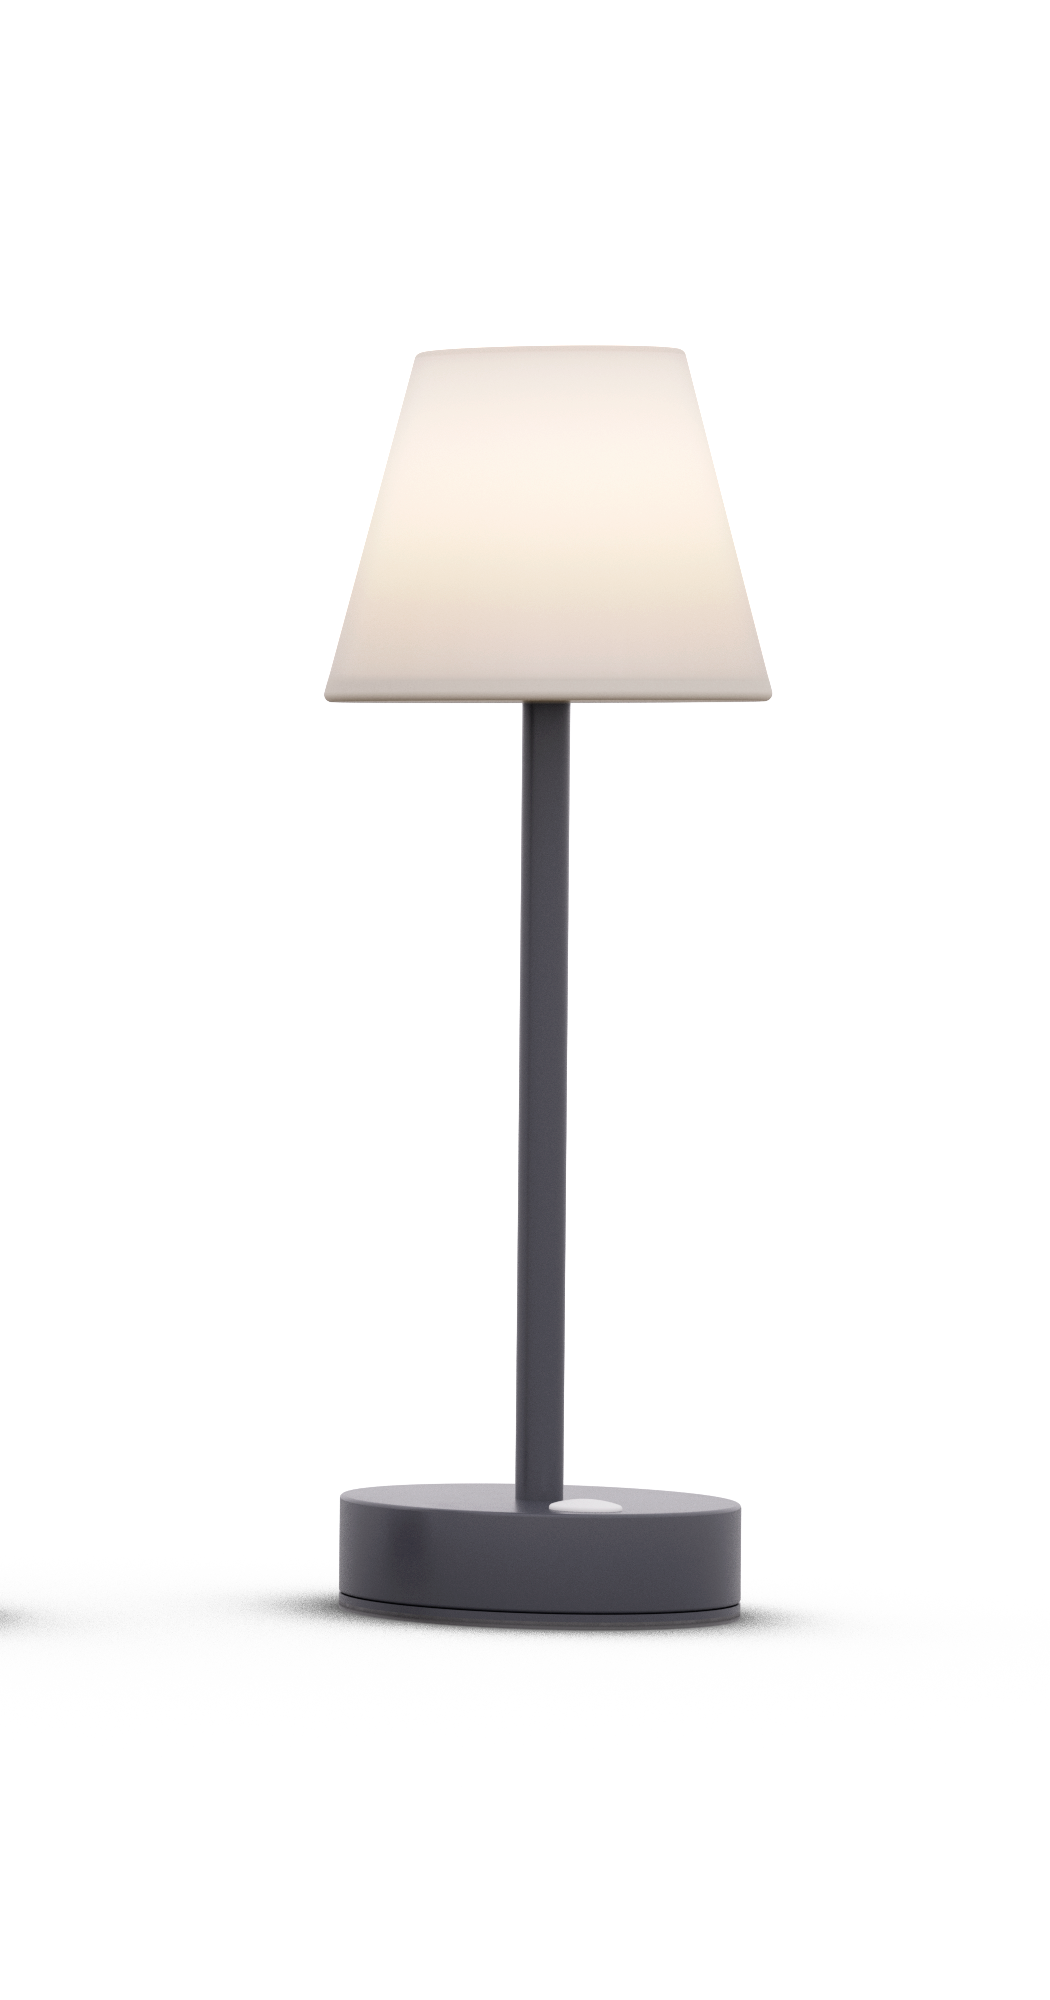 TABLE LAMP LOLA SLIM ANTHRACITE GREY LED 2W WARM LIGHT TOUCH WITH BATTERY - best price from Maltashopper.com BR420006461